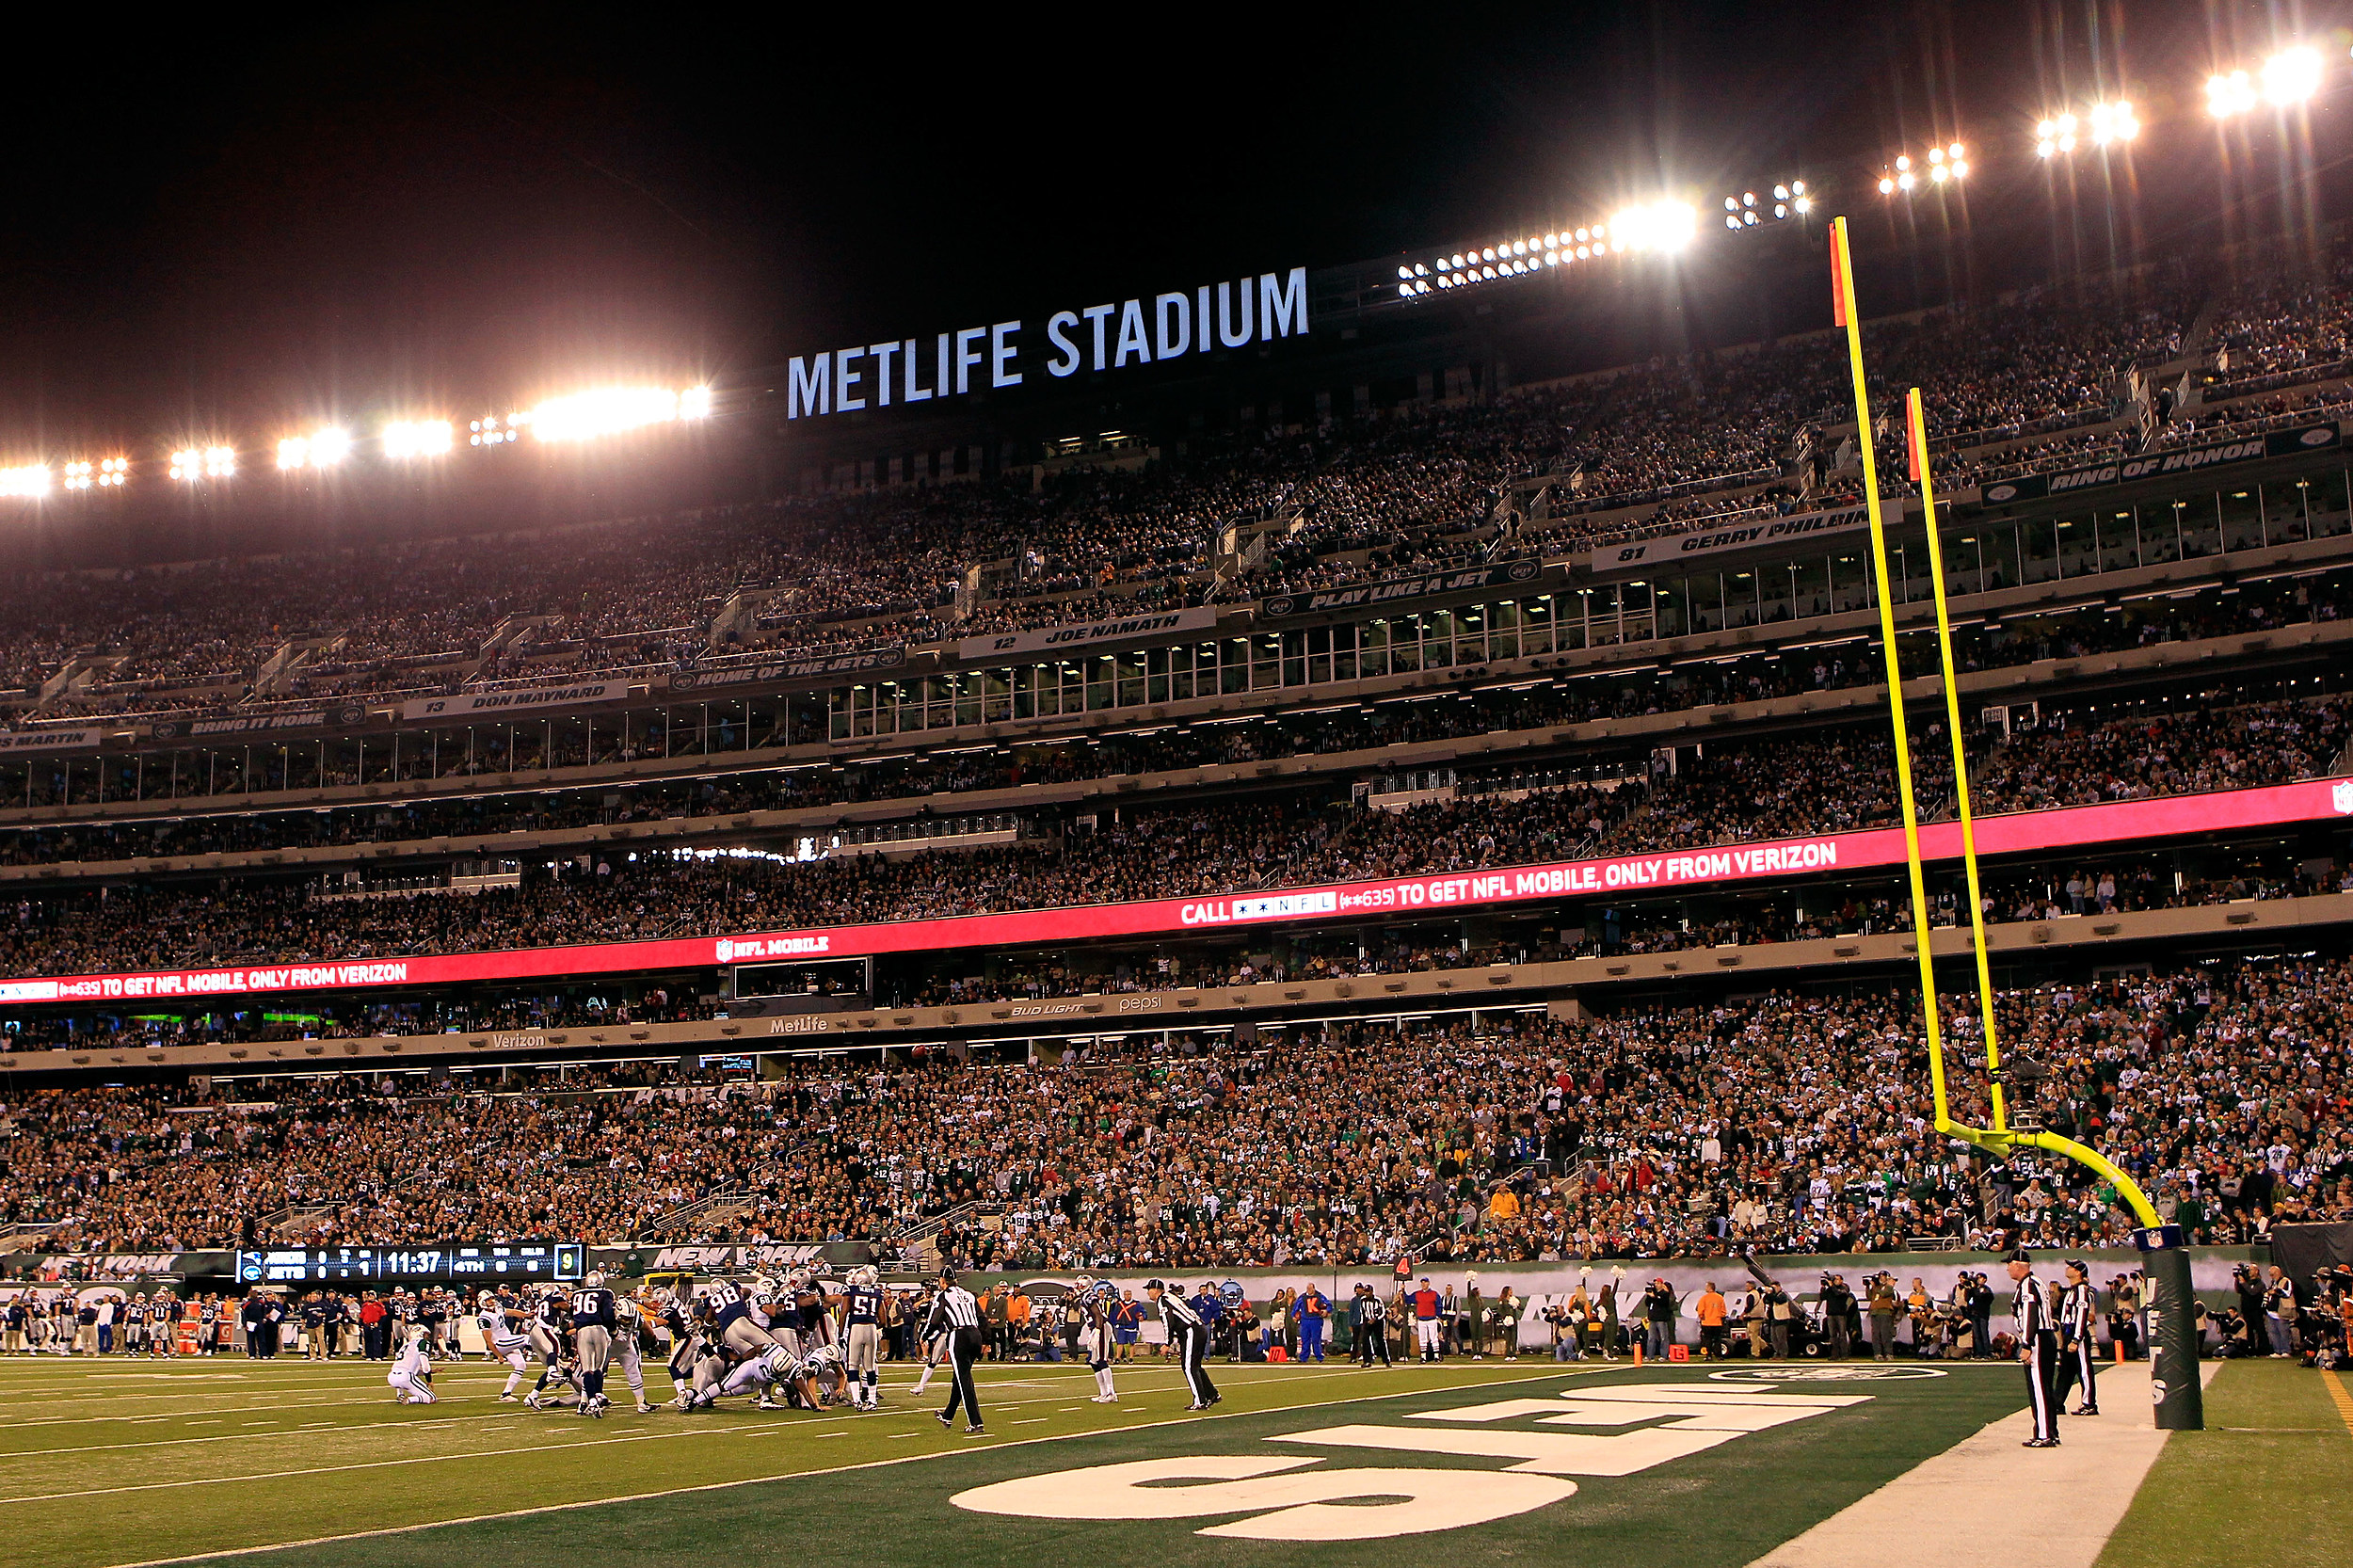 Fan's lawsuit demands Giants, Jets move to NY, pay $6B damages